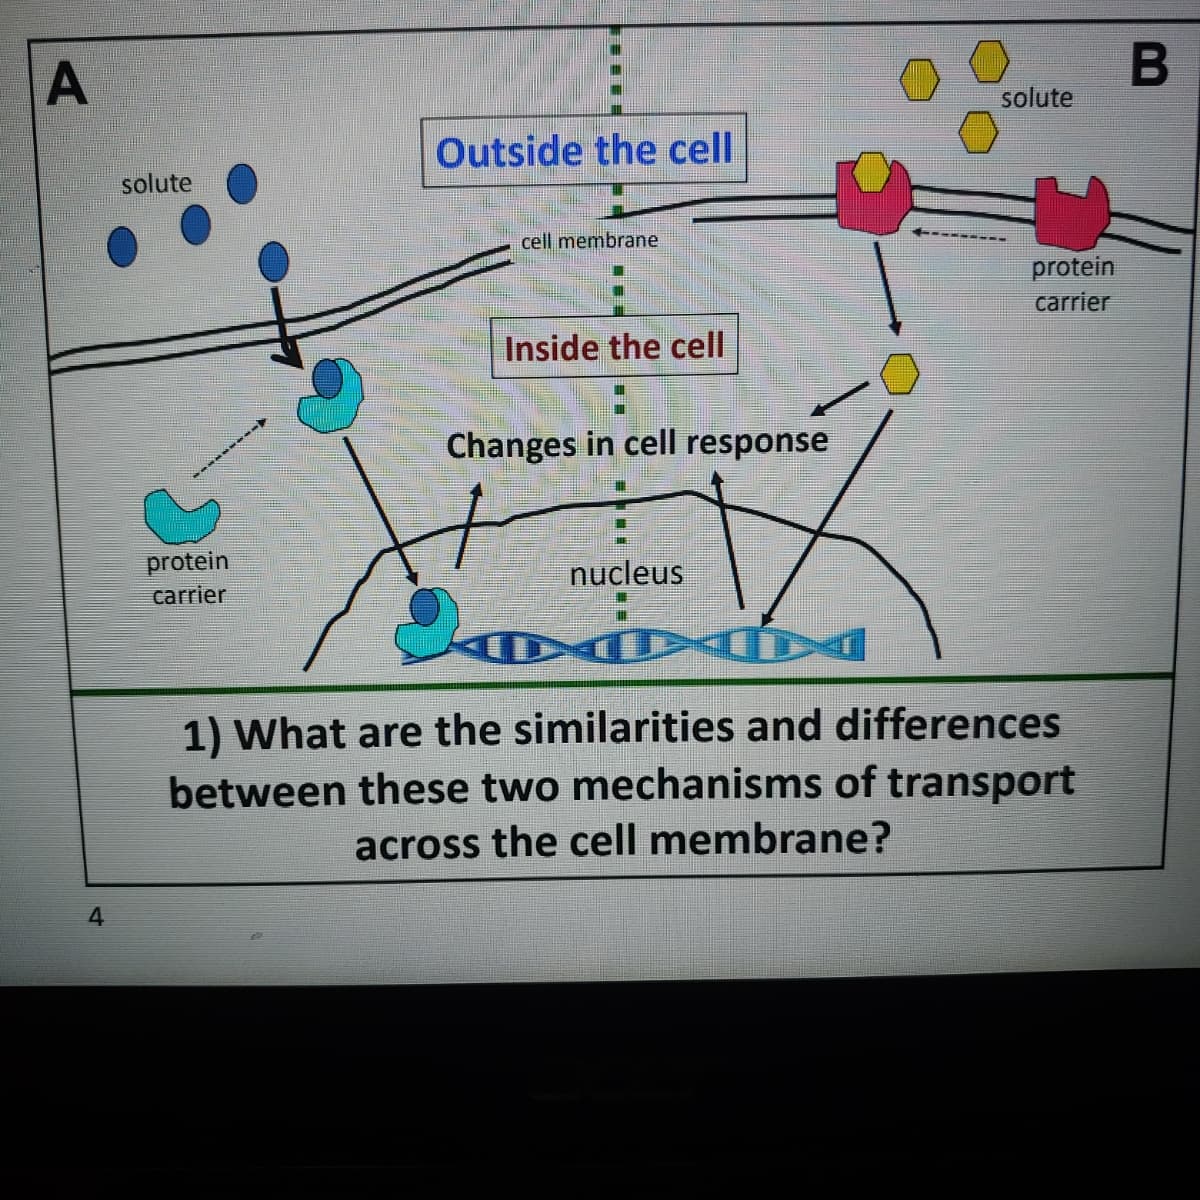 A
solute
Outside the cell
solute
cell membrane
protein
carrier
Inside the cell
Changes in cell response
protein
carrier
nucleus
1) What are the similarities and differences
between these two mechanisms of transport
across the cell membrane?
4.
B
